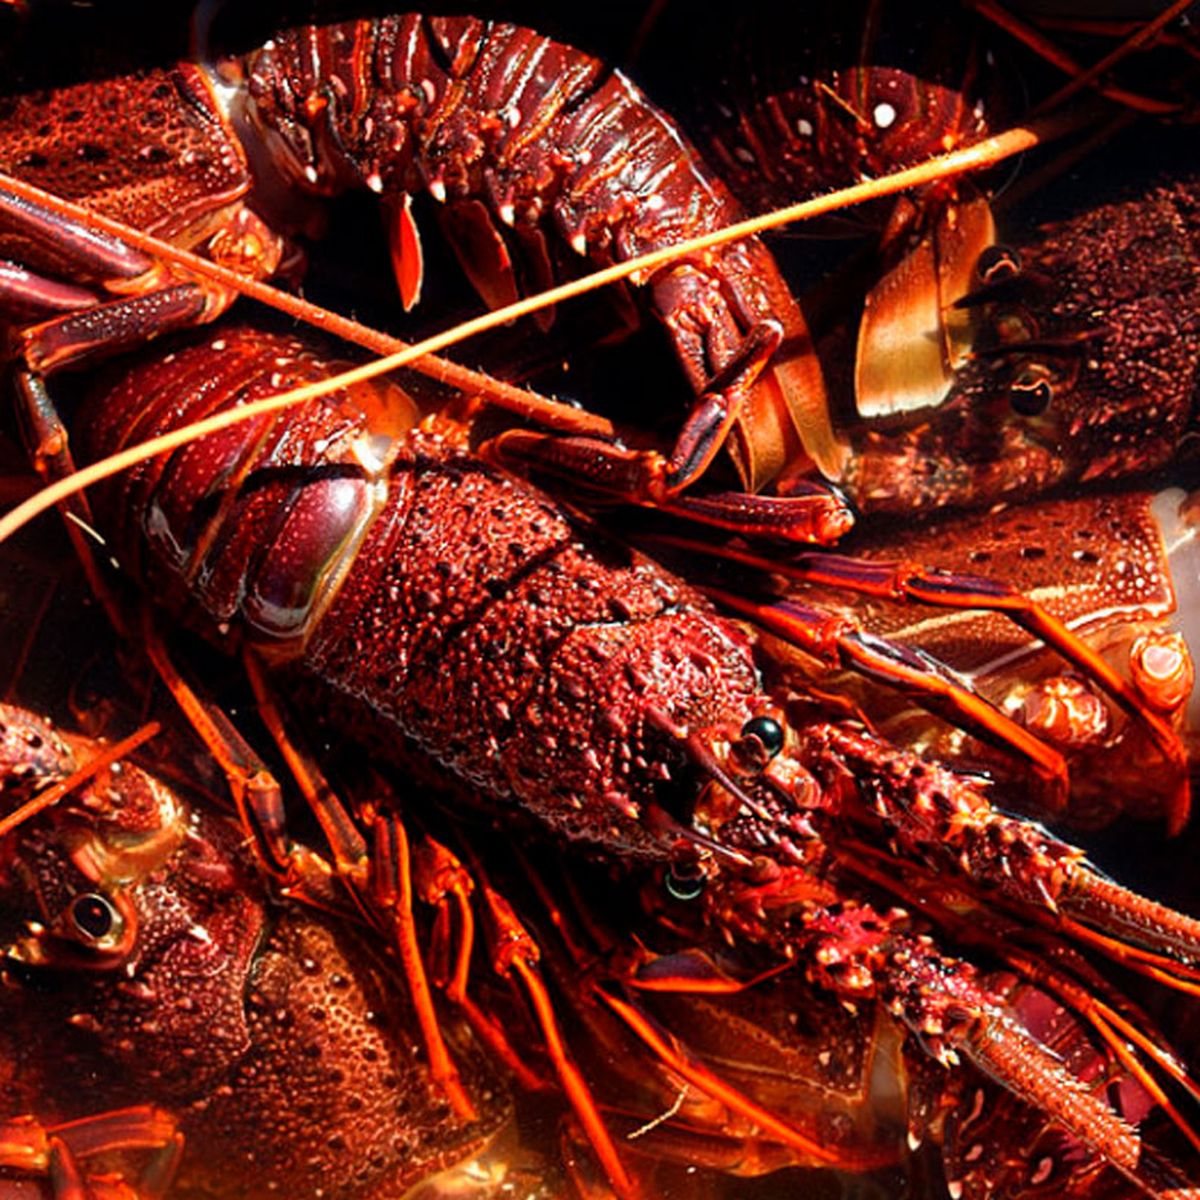 Lobsters and crabs 'capable of feeling pain' and shouldn't be boiled alive,  UK report says